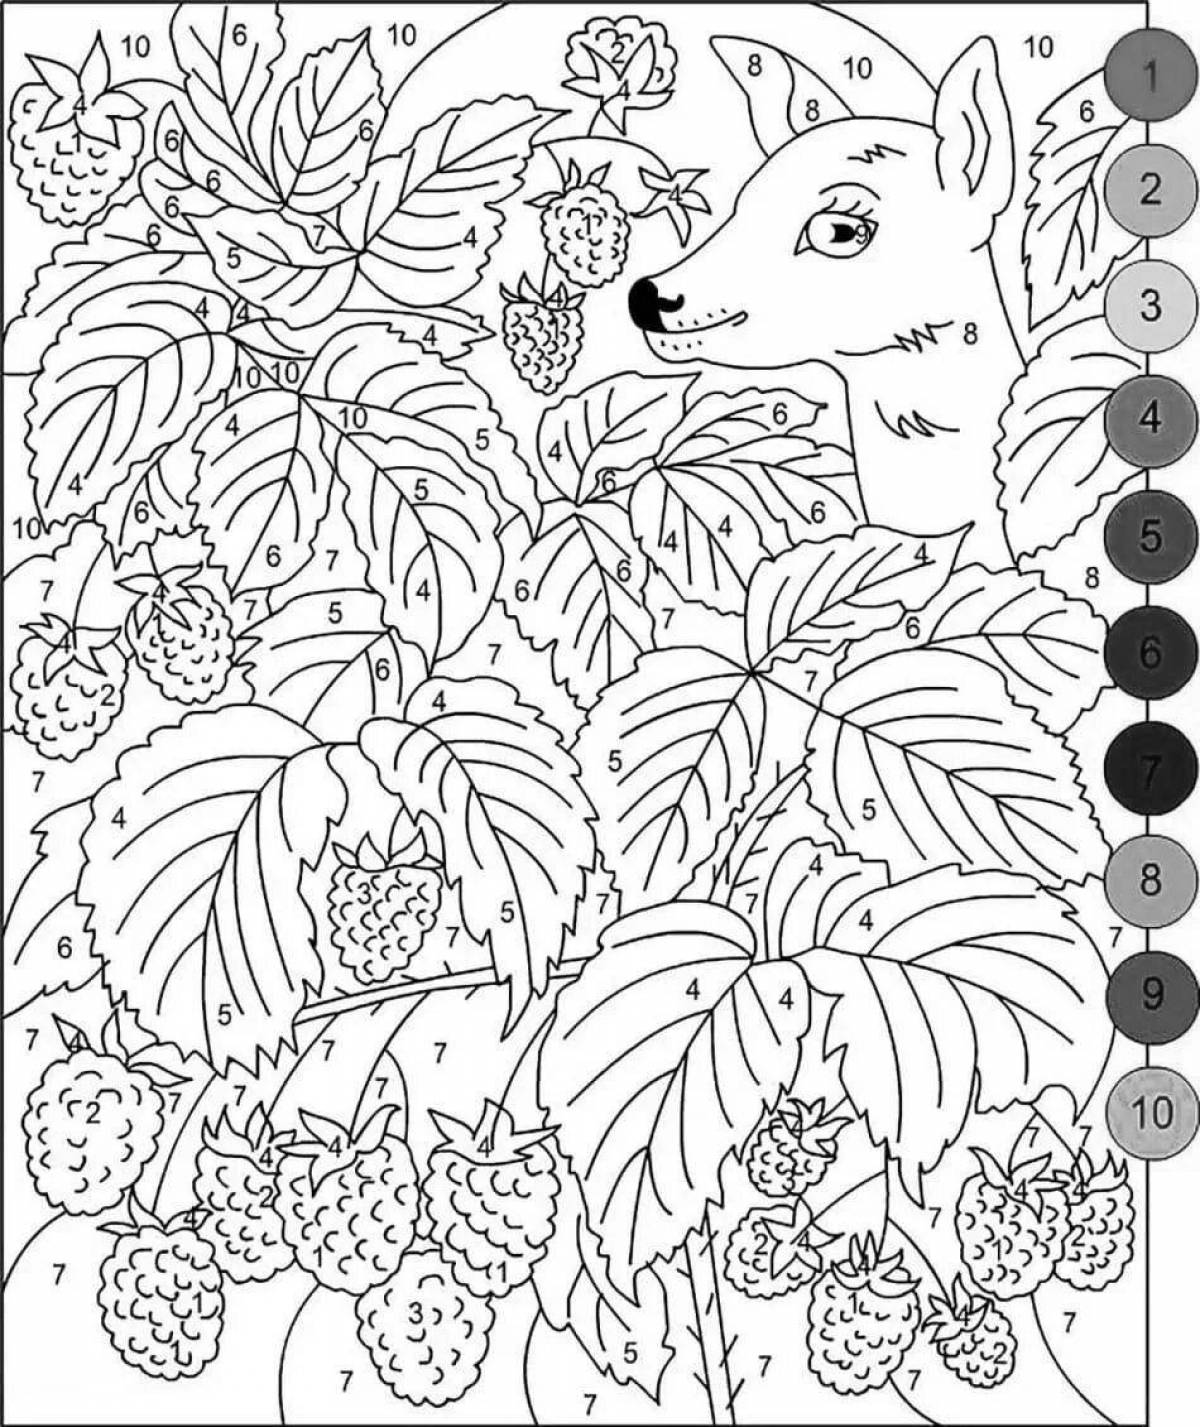 Color frenzy big by numbers coloring book